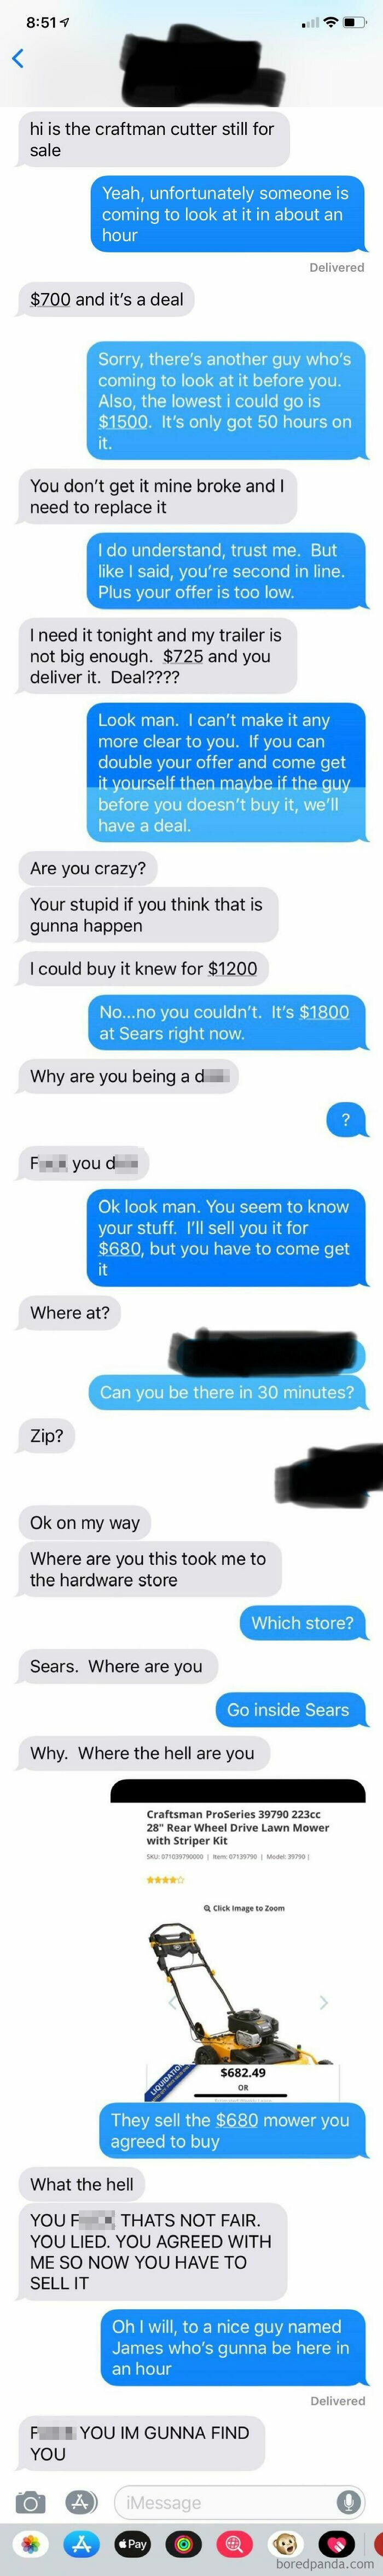 The Second Interaction I’ve Had With A Choosing Beggar On Craigslist. This Time For A Lawn-Mower I Was Selling